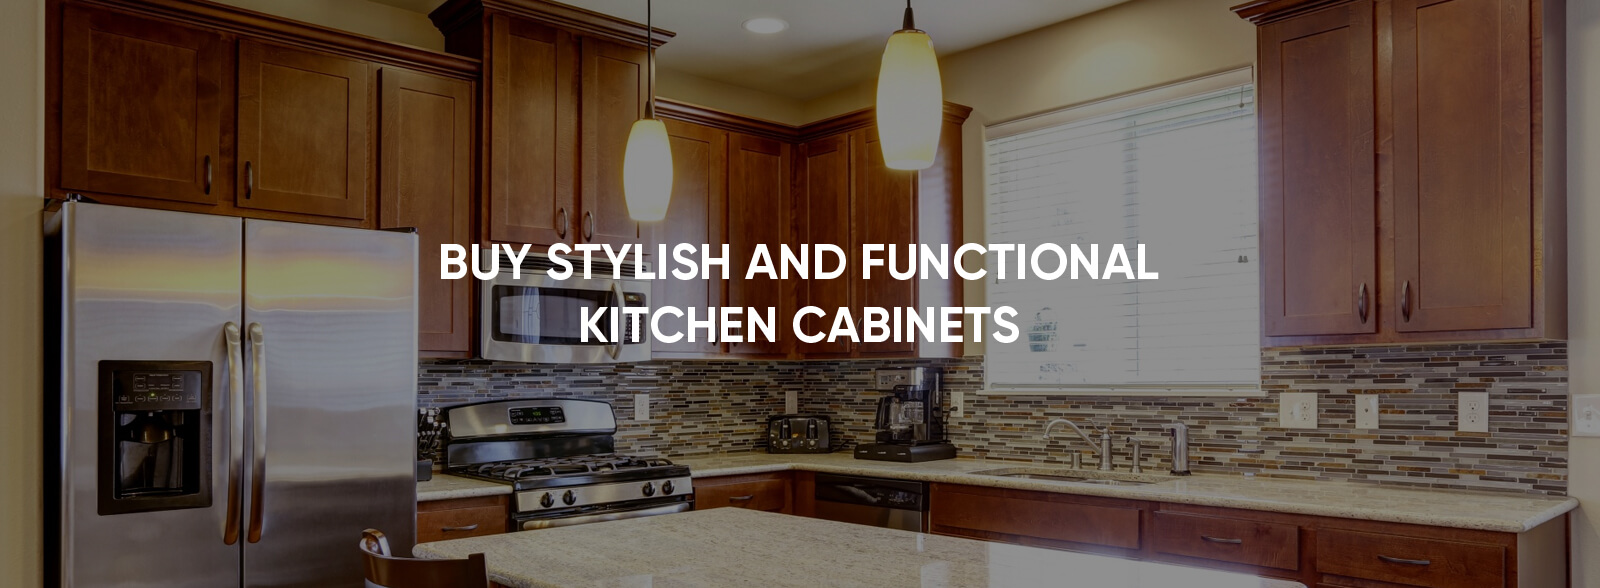 Best Kitchen Cabinets Online Cabinets For Sale Fgy Online